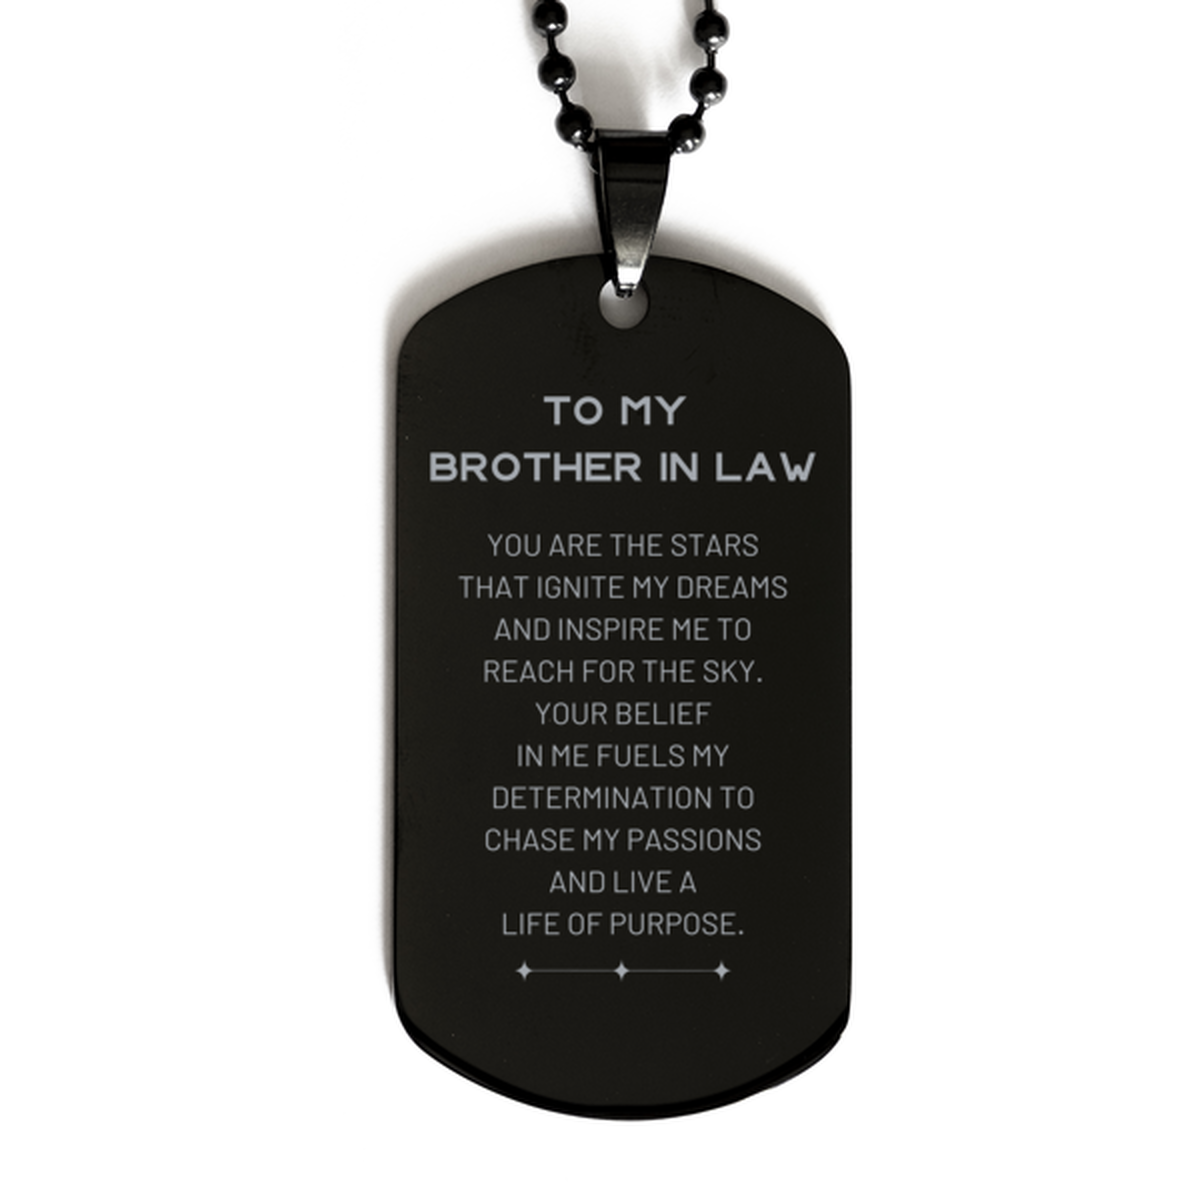 To My Brother In Law Black Dog Tag, You are the stars that ignite my dreams and inspire me to reach for the sky, Birthday Unique Gifts For Brother In Law, Thank You Gifts For Brother In Law